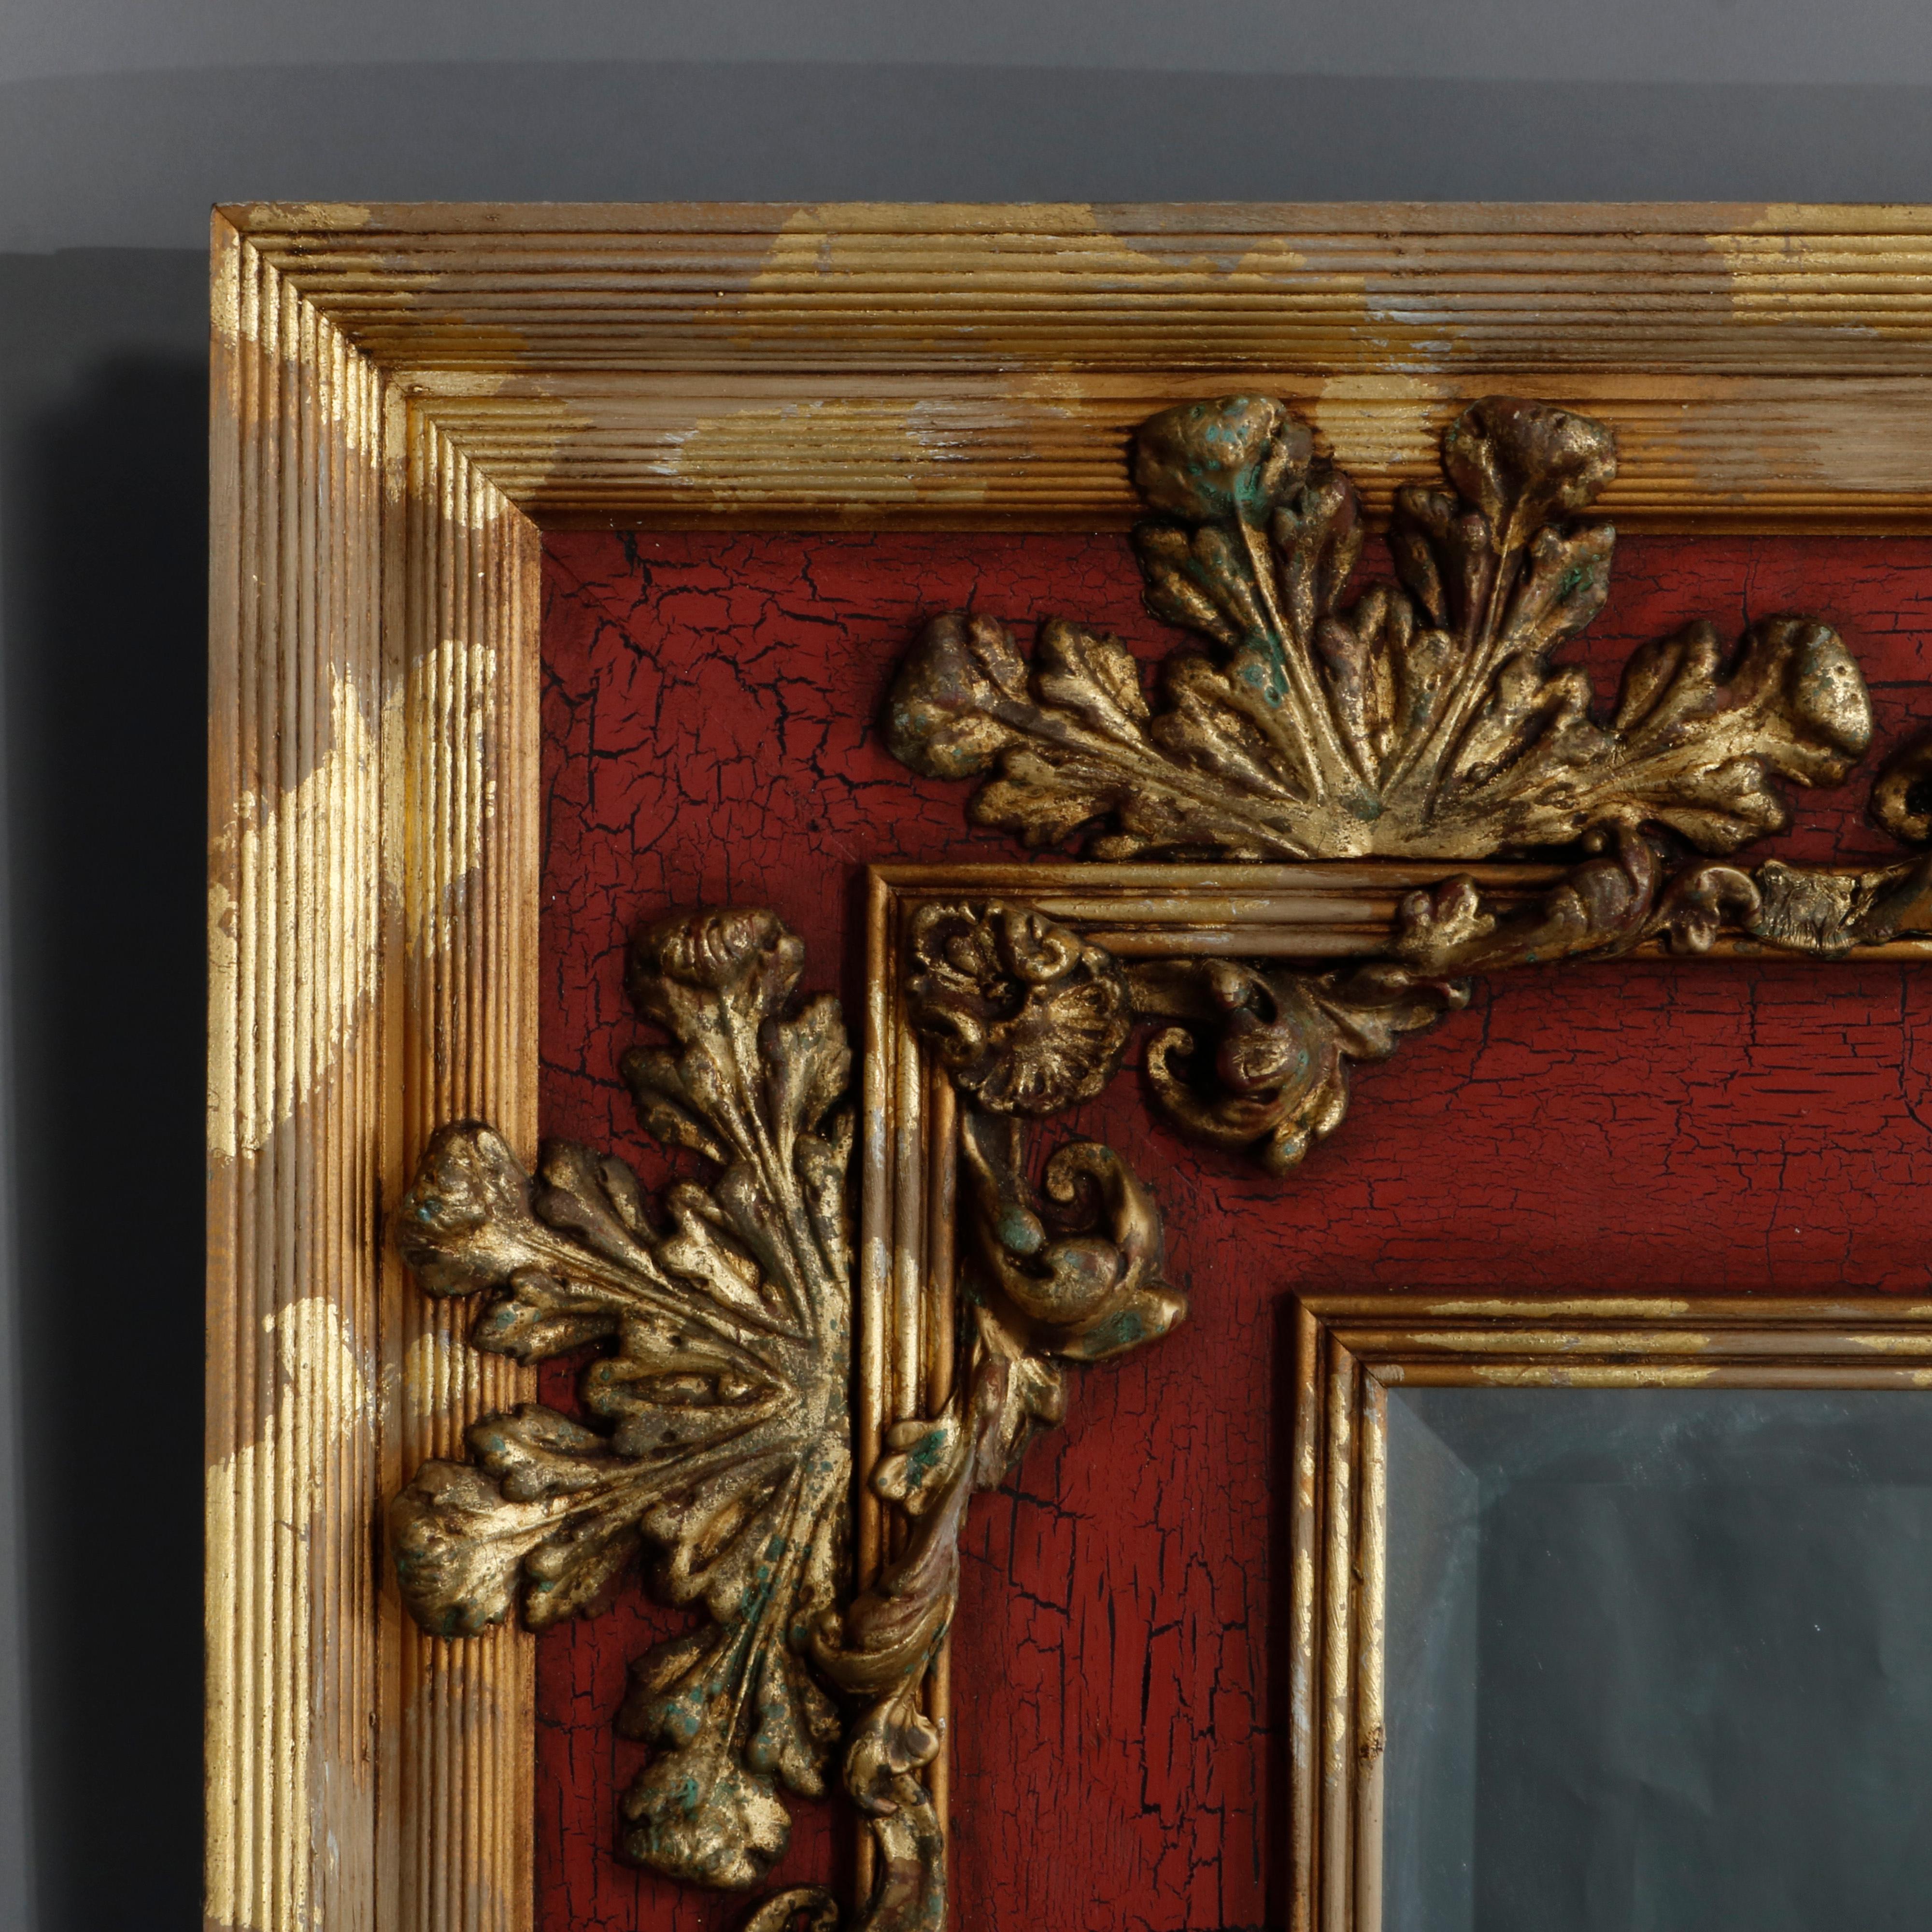 A vintage monumental over mantel mirror by John-Richard offers Neoclassical styling with vermillion red faux painted & gilt frame with carved acanthus foliate elements, hand numbered maker label as photographed, 20th century.

Measures: 53.5